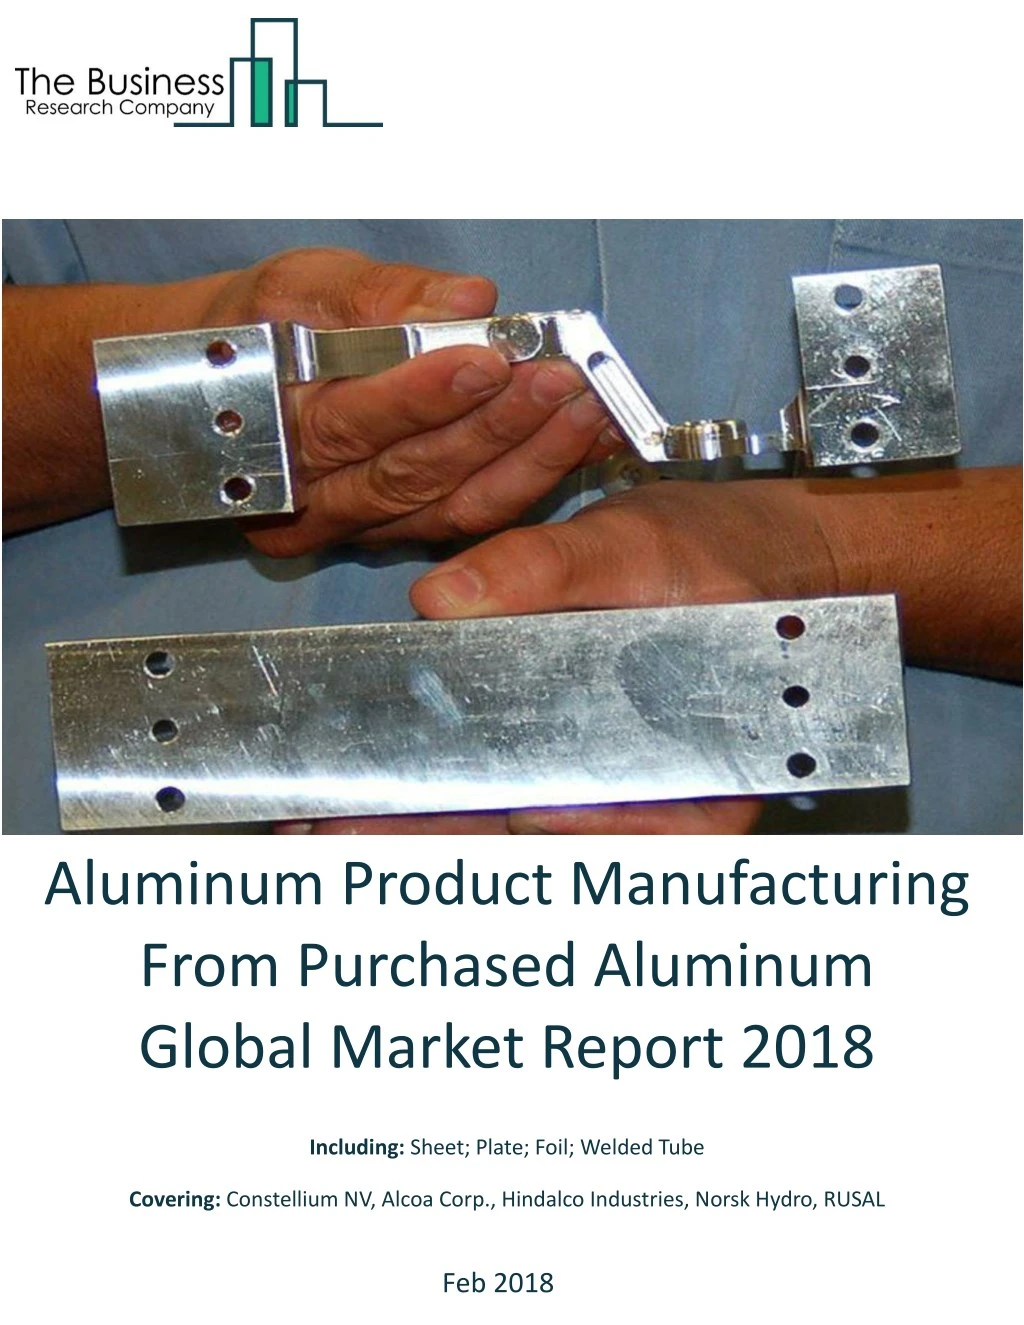 aluminum product manufacturing from purchased